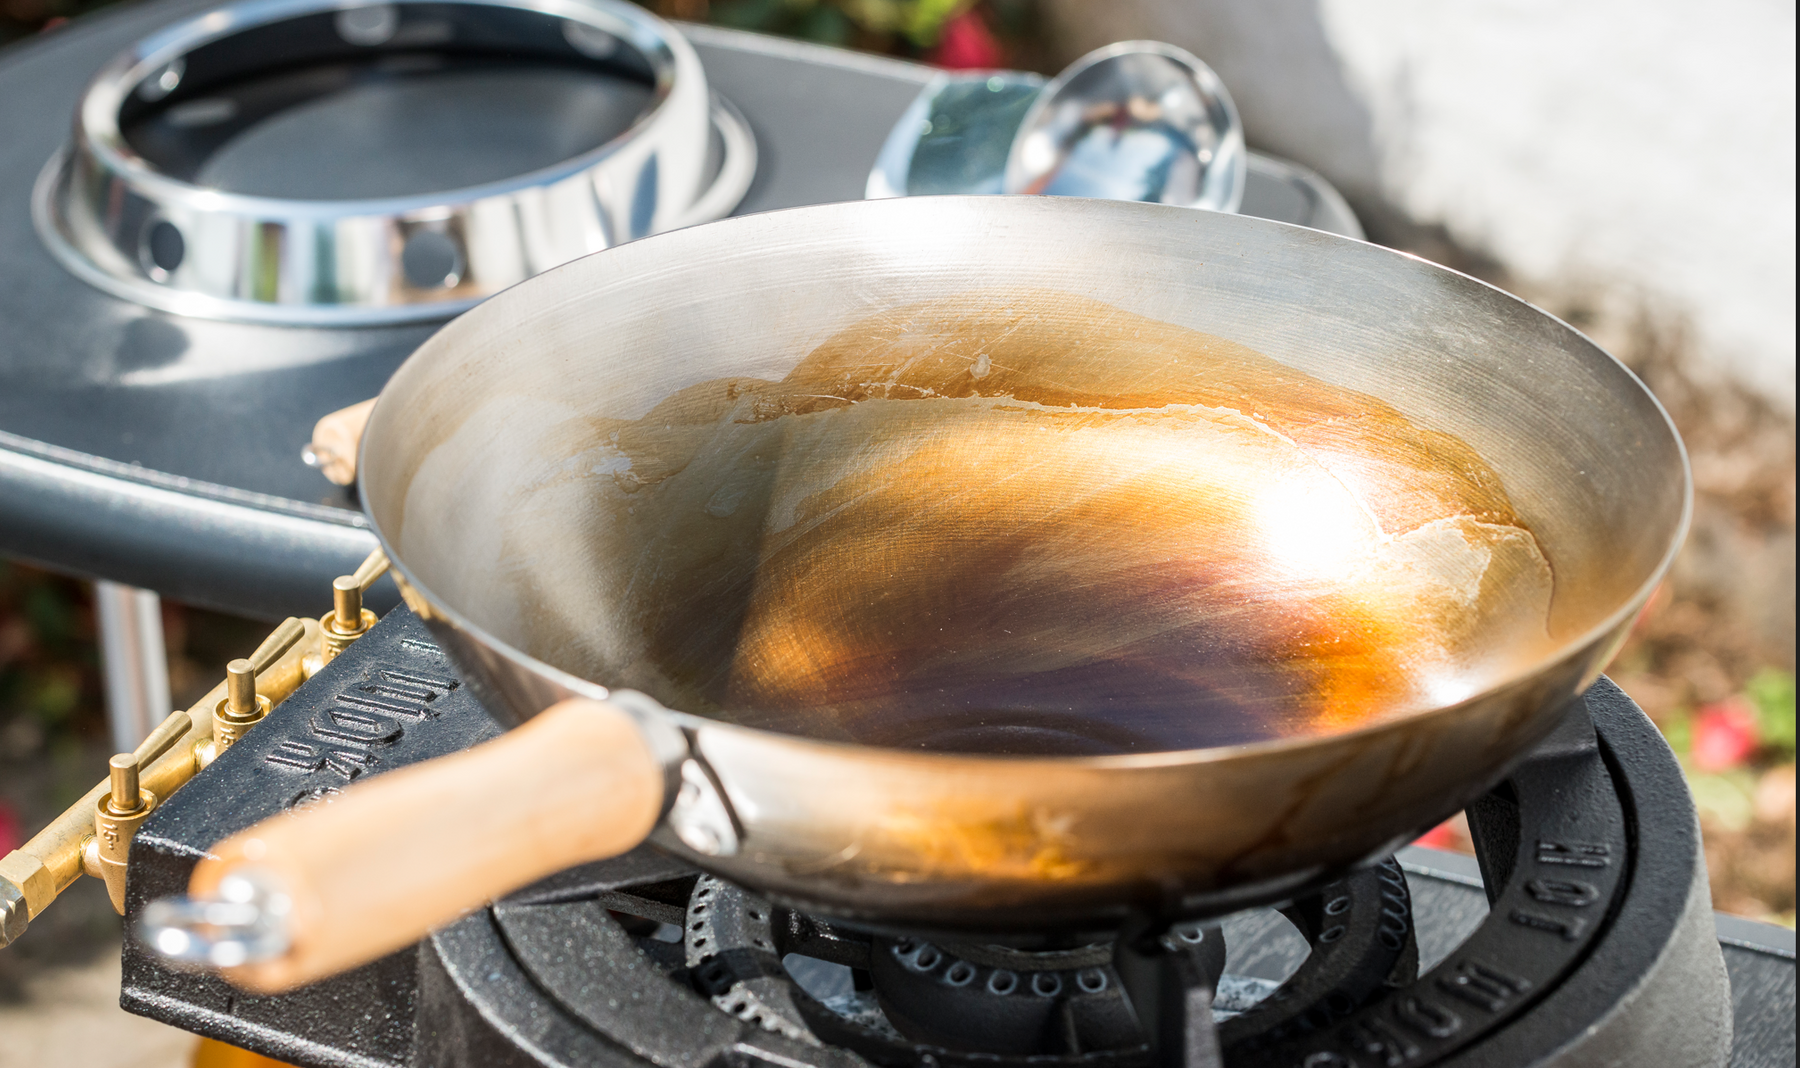 HOW TO: Maintenance of your Wok Pan